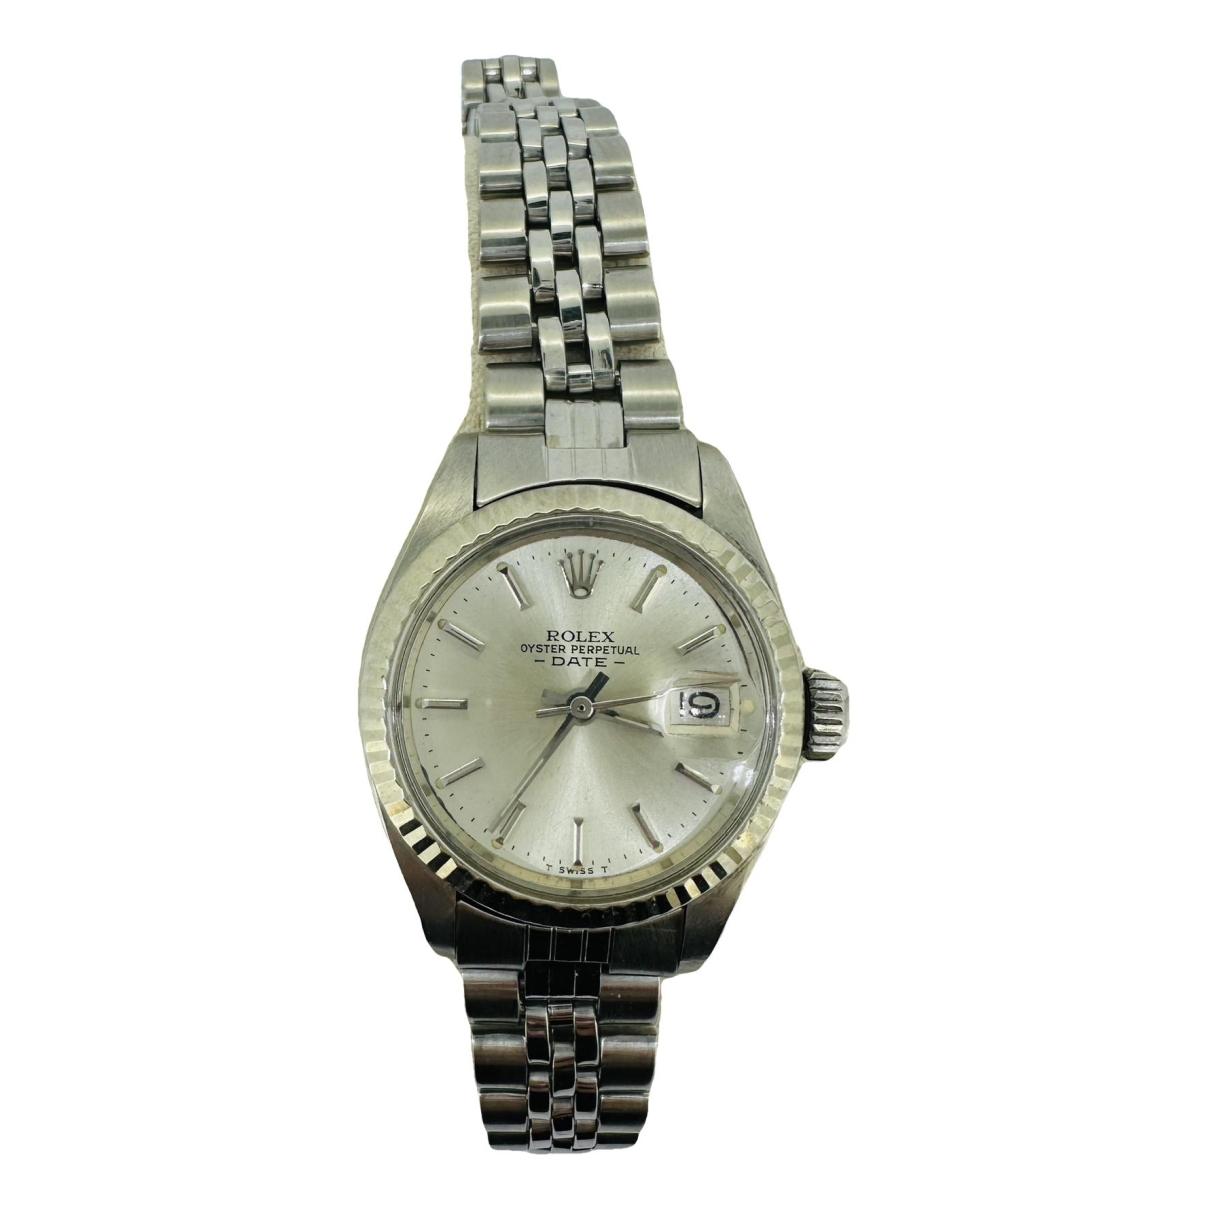 Lady Oyster Perpetual 24mm watch